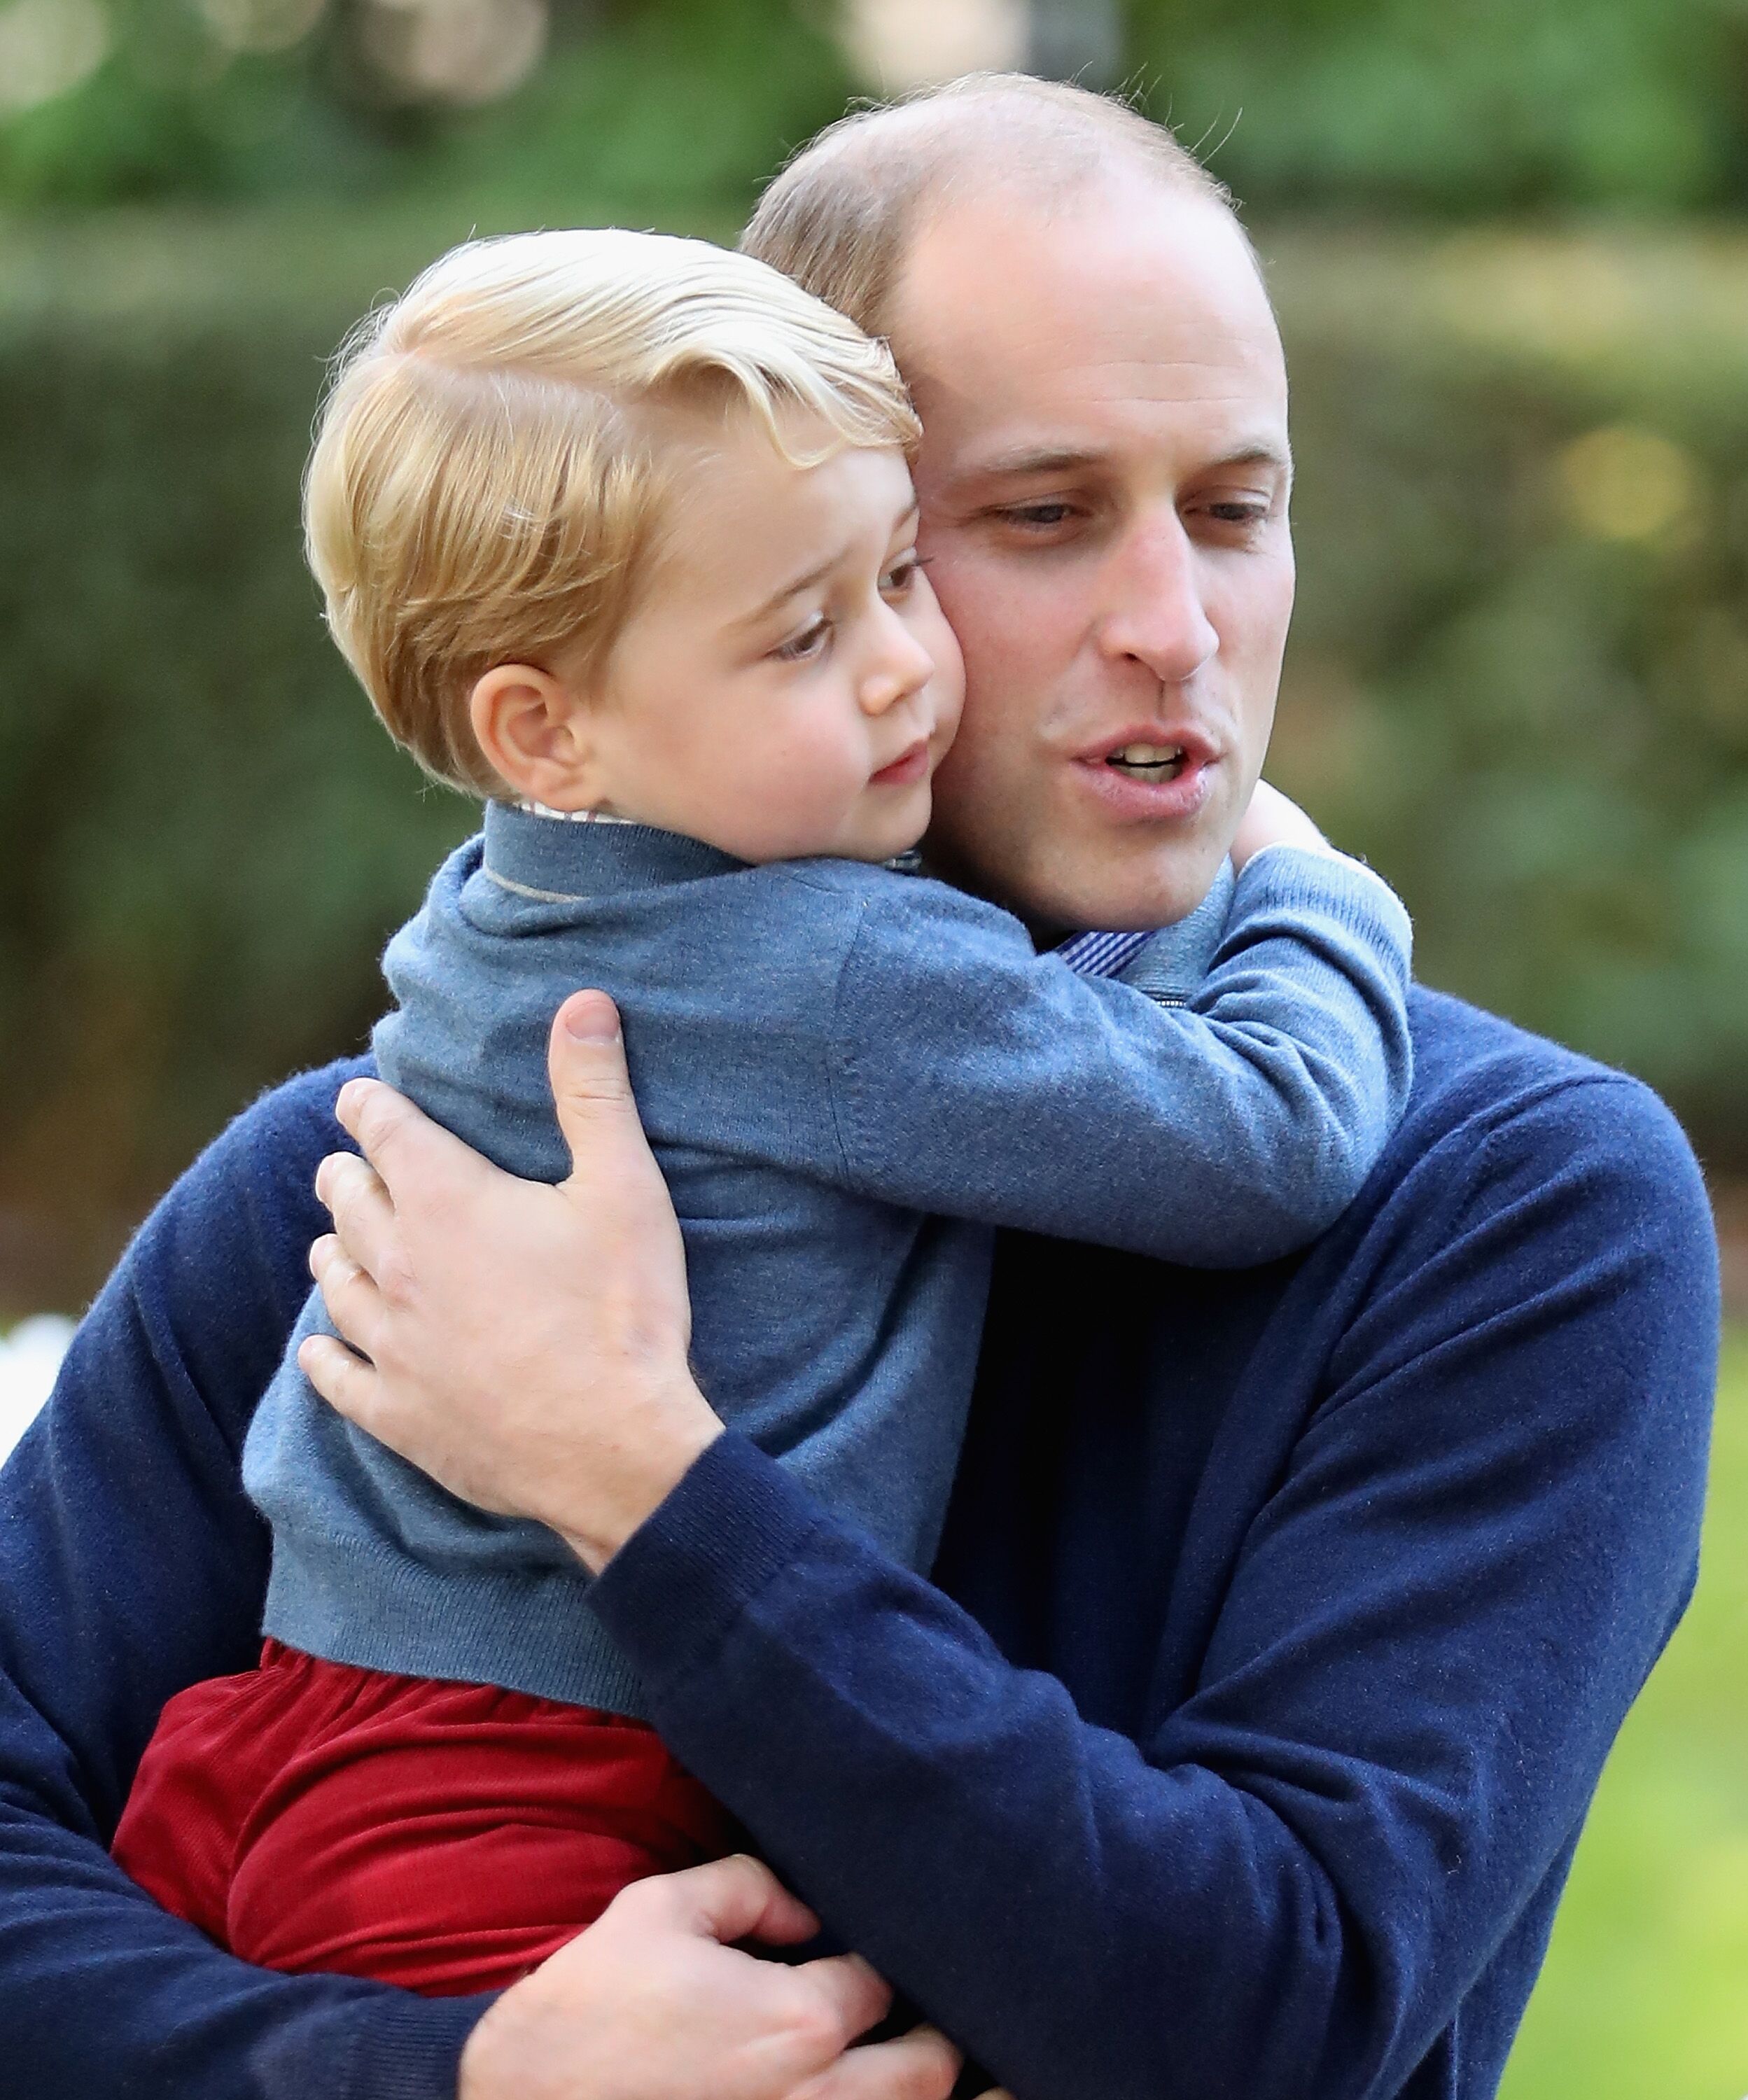 Prince William and Prince George at a children's party. | Source: Getty Images